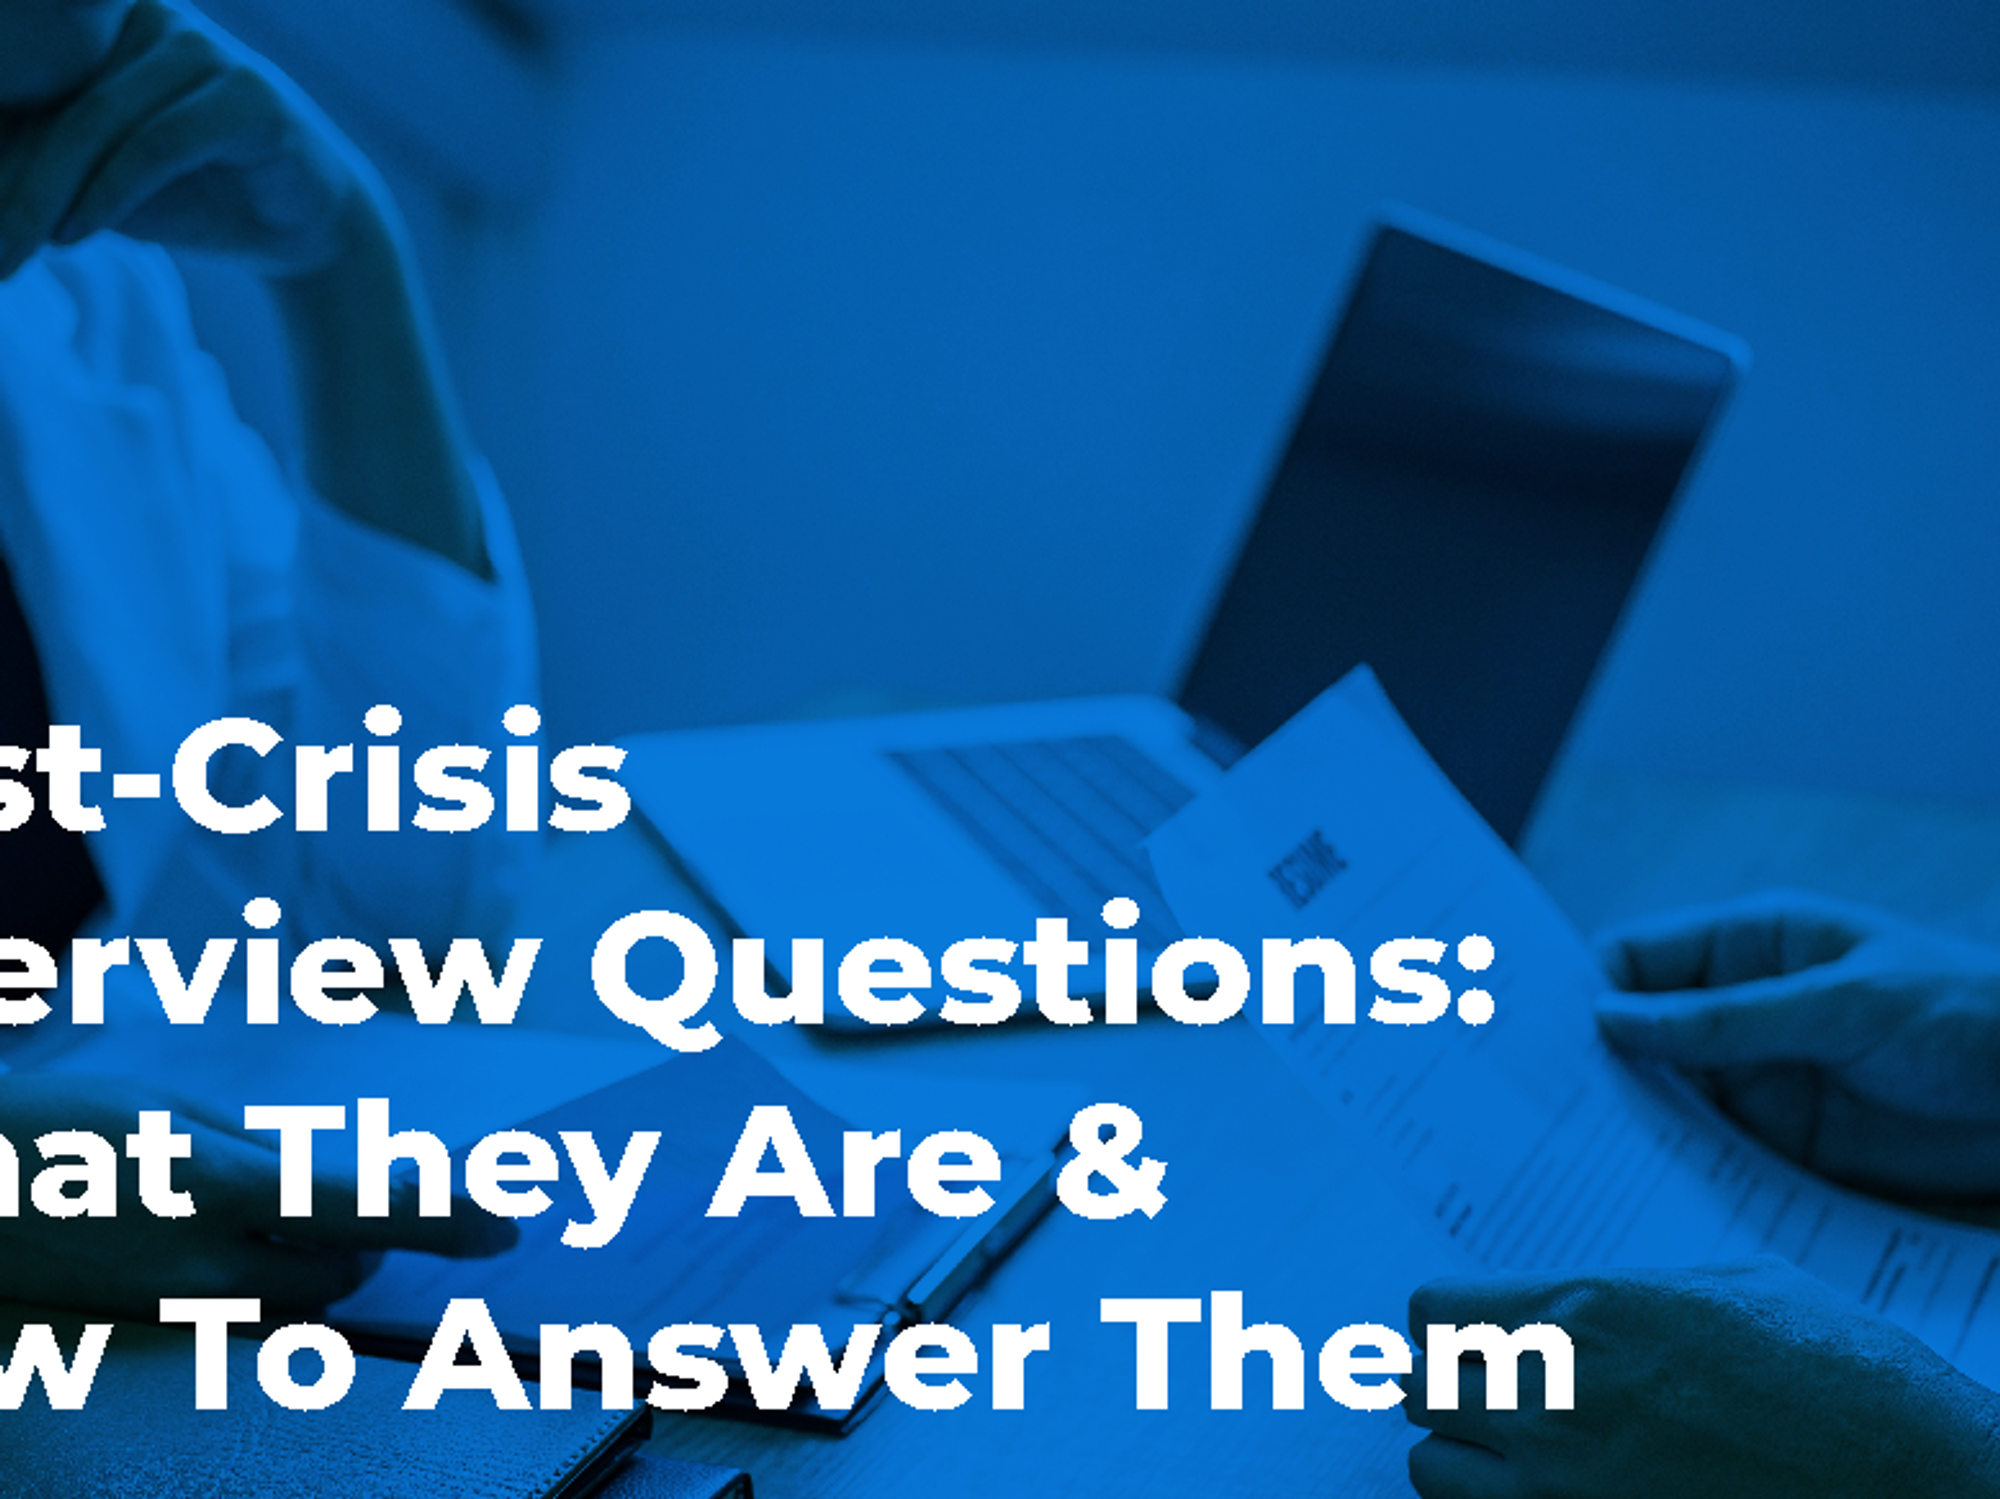 Post-Crisis Interview Questions: What They Are & How To Answer Them